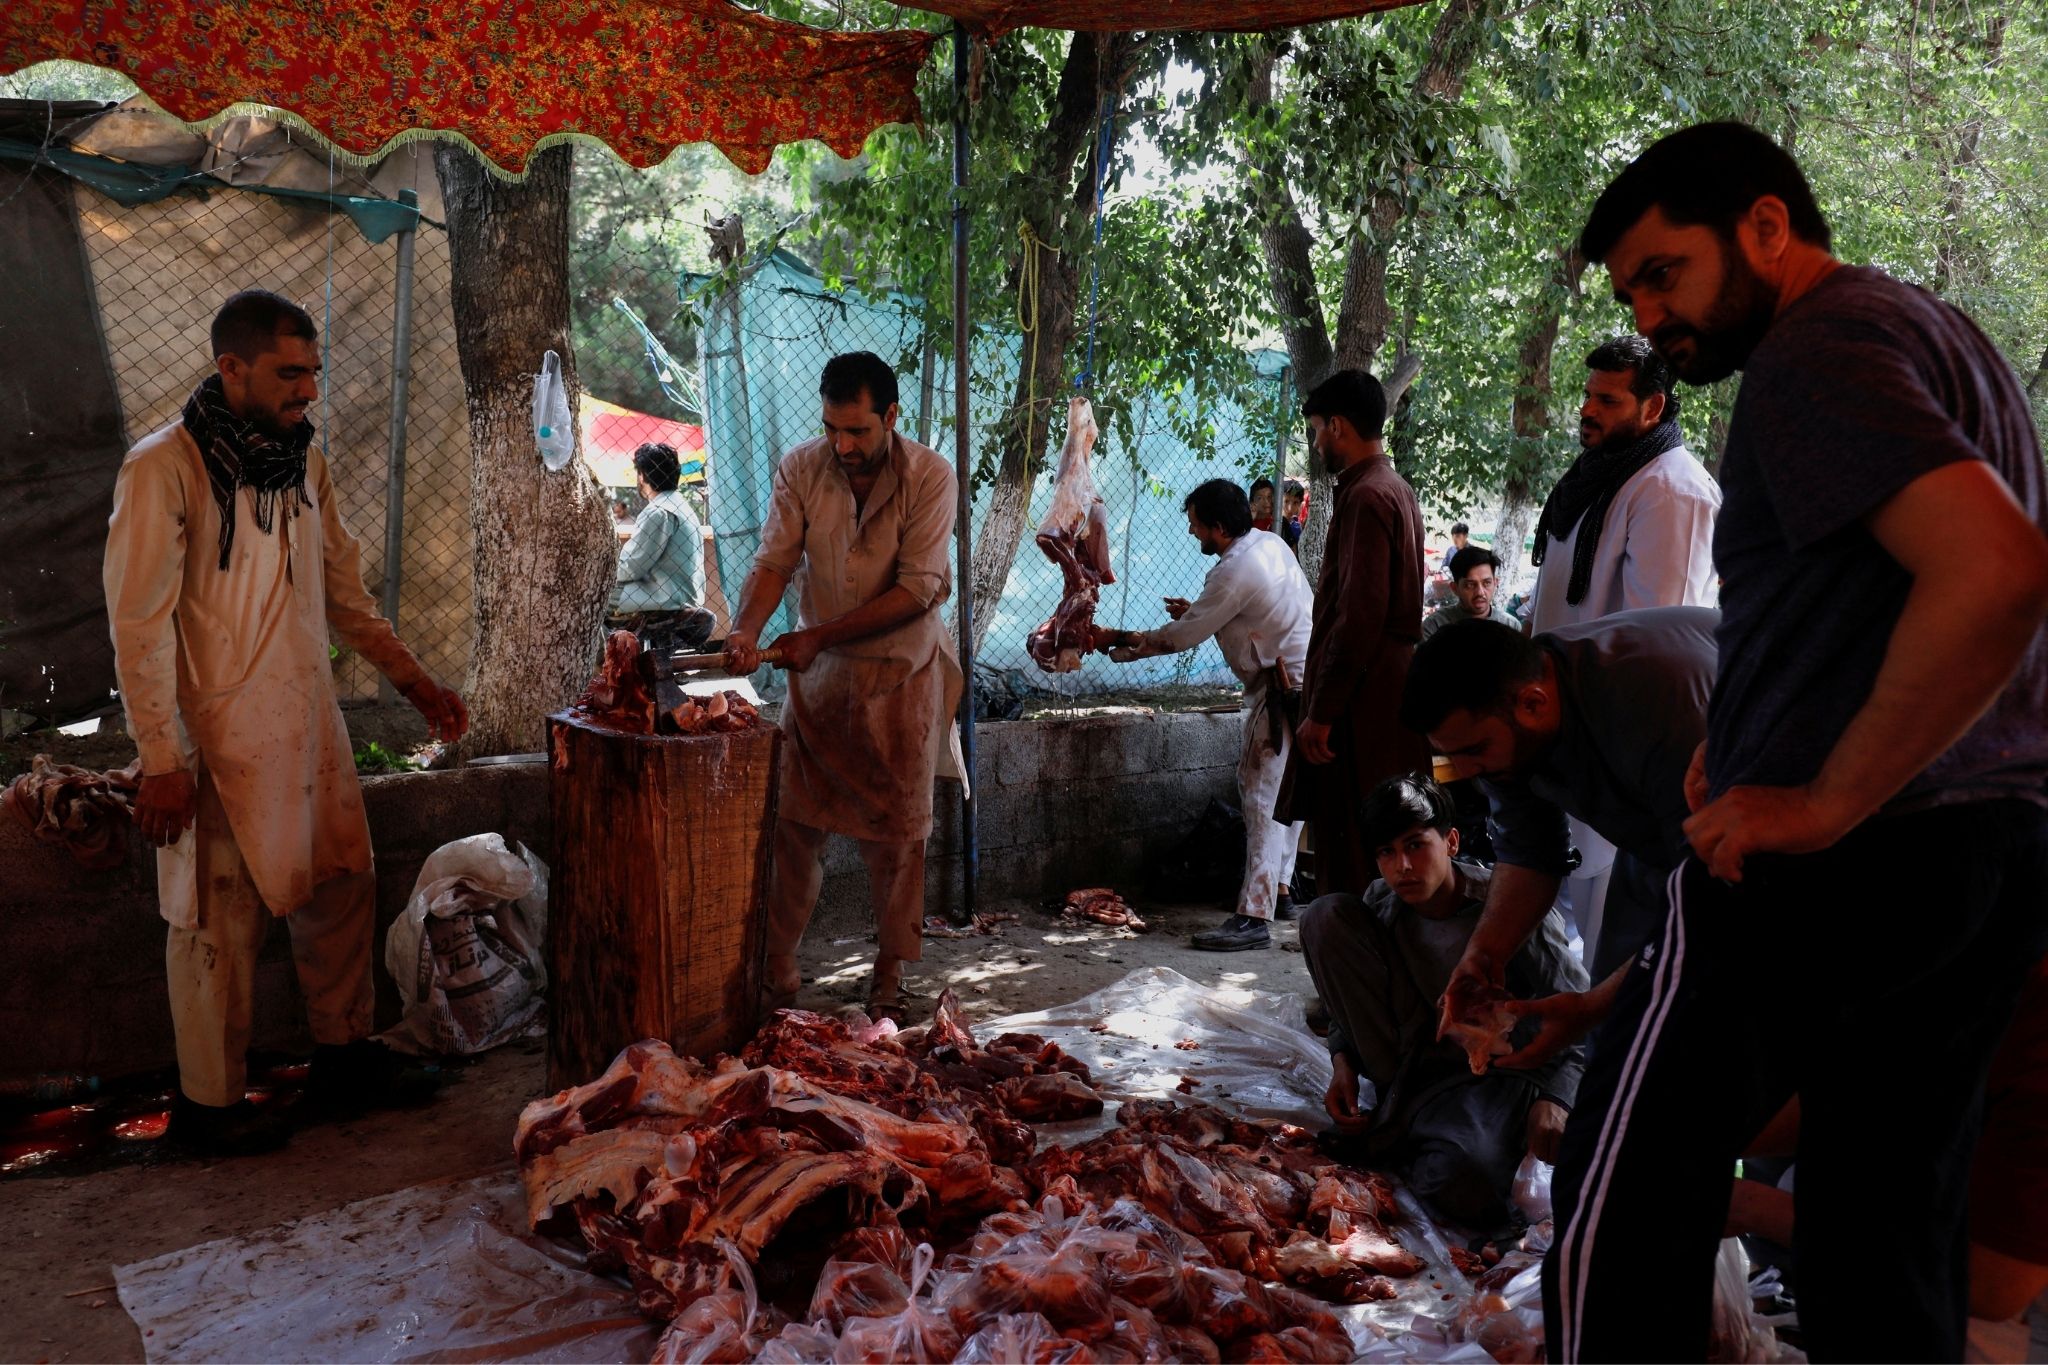 Afghan men chop meat on the first day of Eid al-Adha, in Kabul, Afghanistan, July 9, 2022.